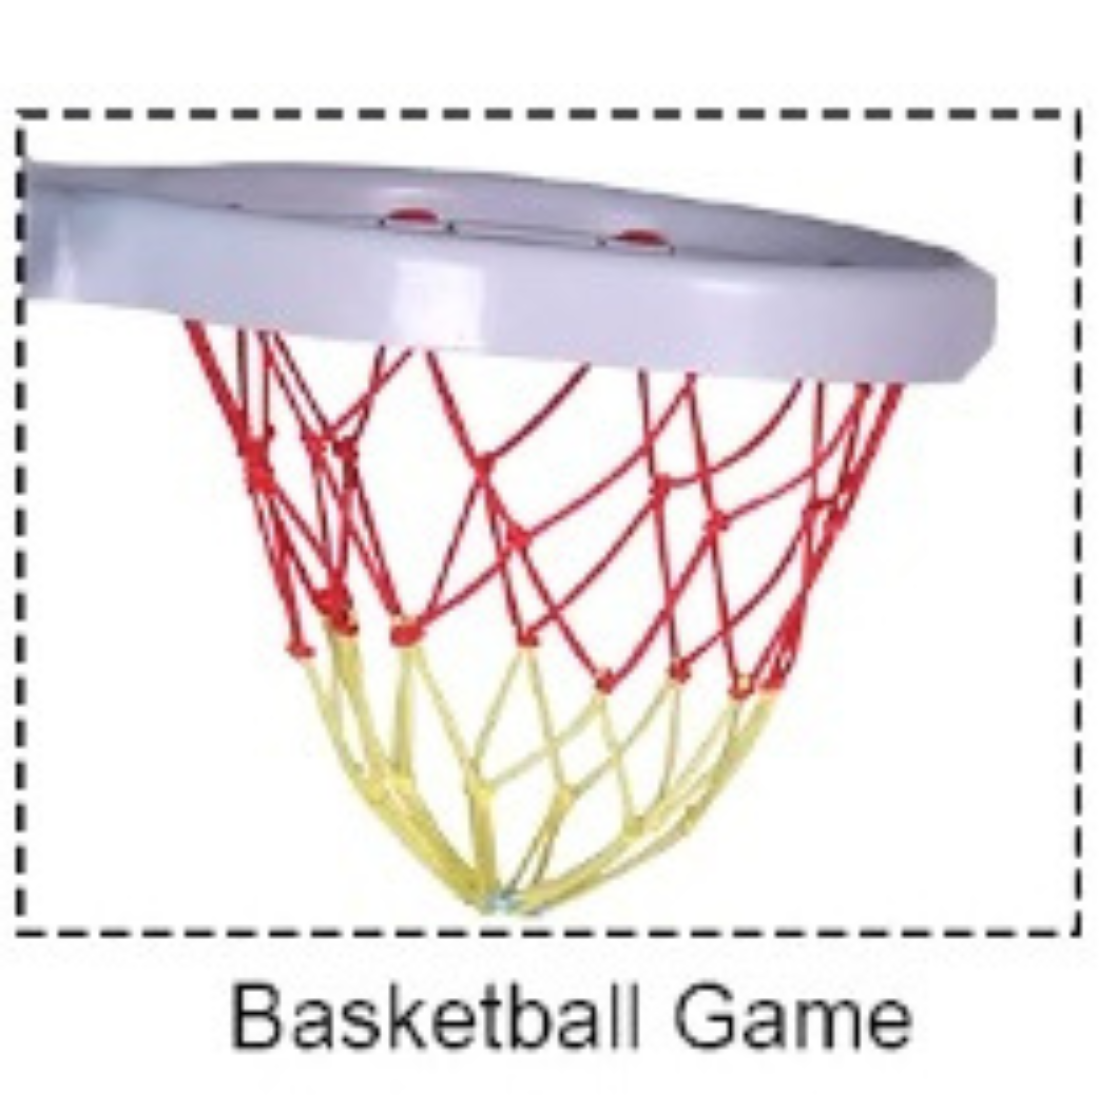 MM TOYS Basketball Hoop For Toddlers Indoor Outdoor 3 in 1 Sports Activity Play Centre 6704 Adjustable Football/Soccer Goal Game Ring Toss- Multicolor